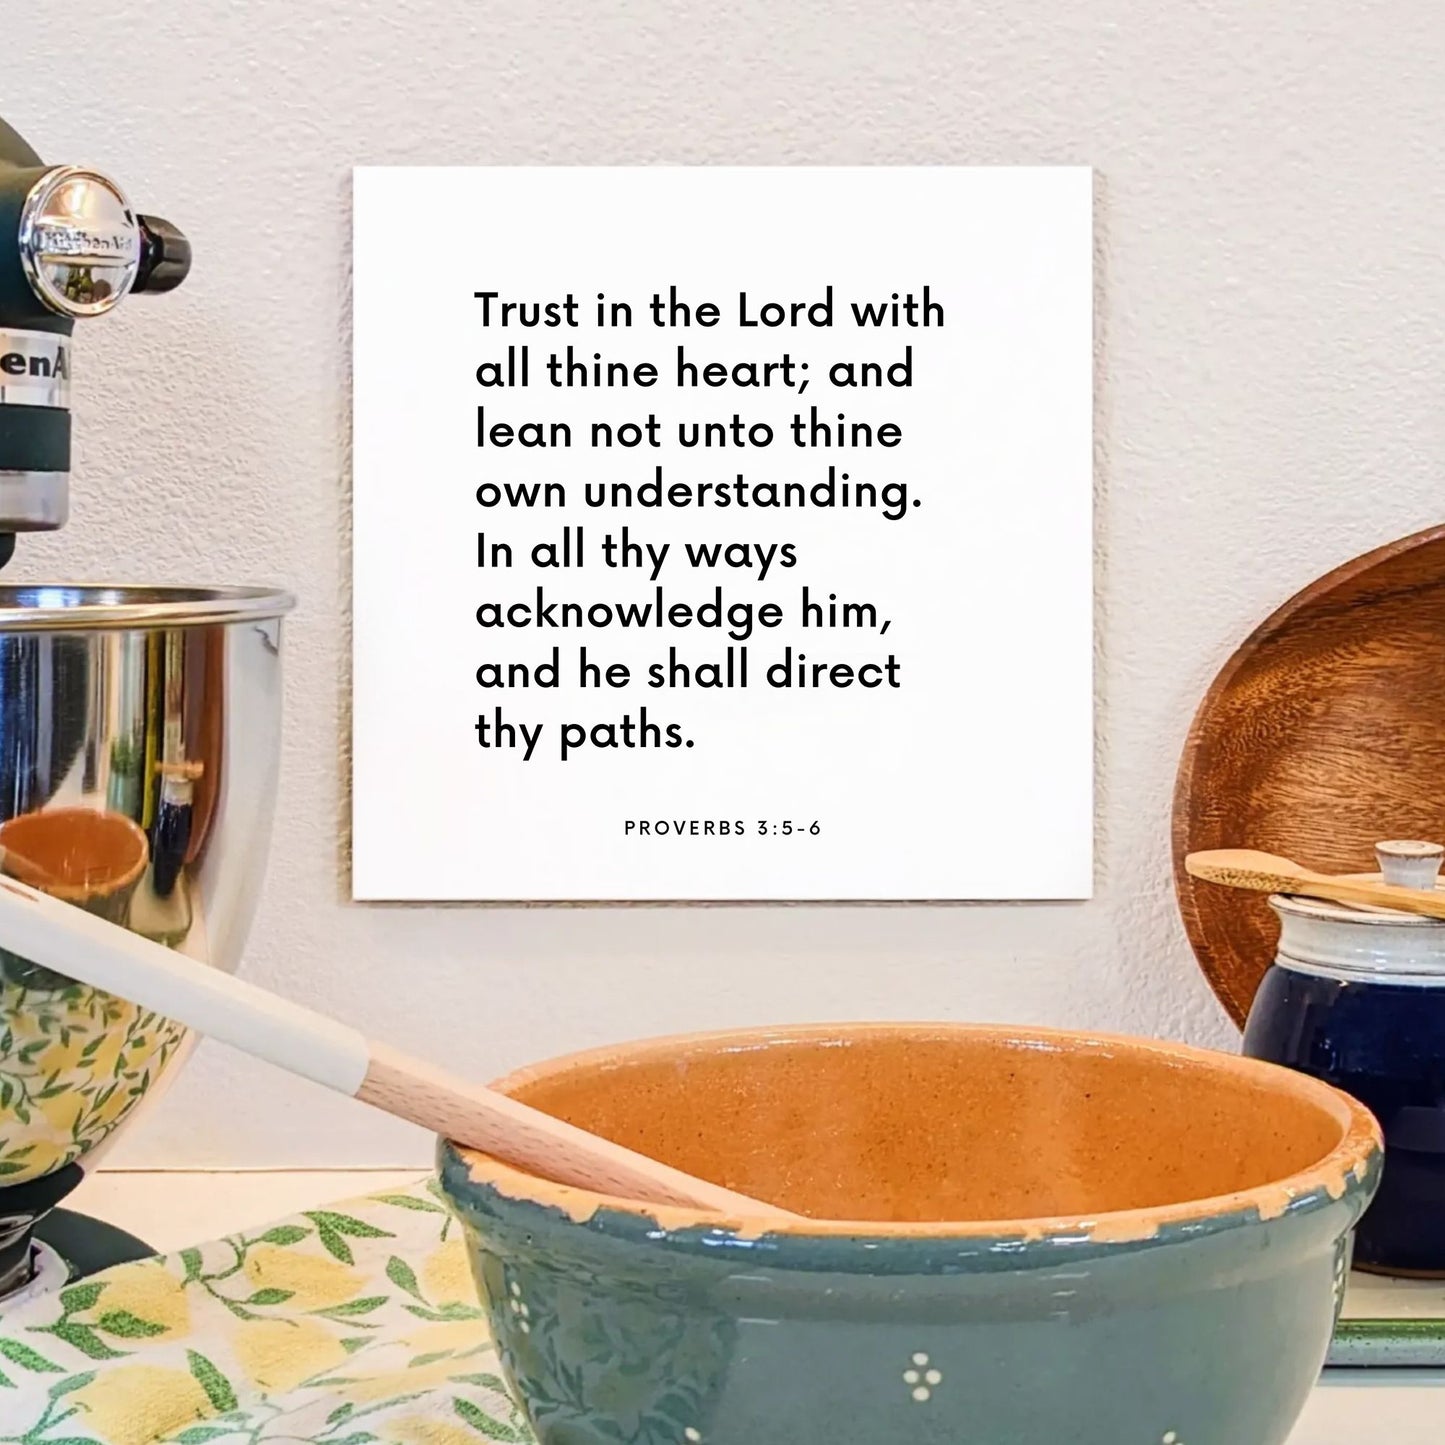 Kitchen mouting of the scripture tile for Proverbs 3:5-6 - "Trust in the Lord with all thine heart"